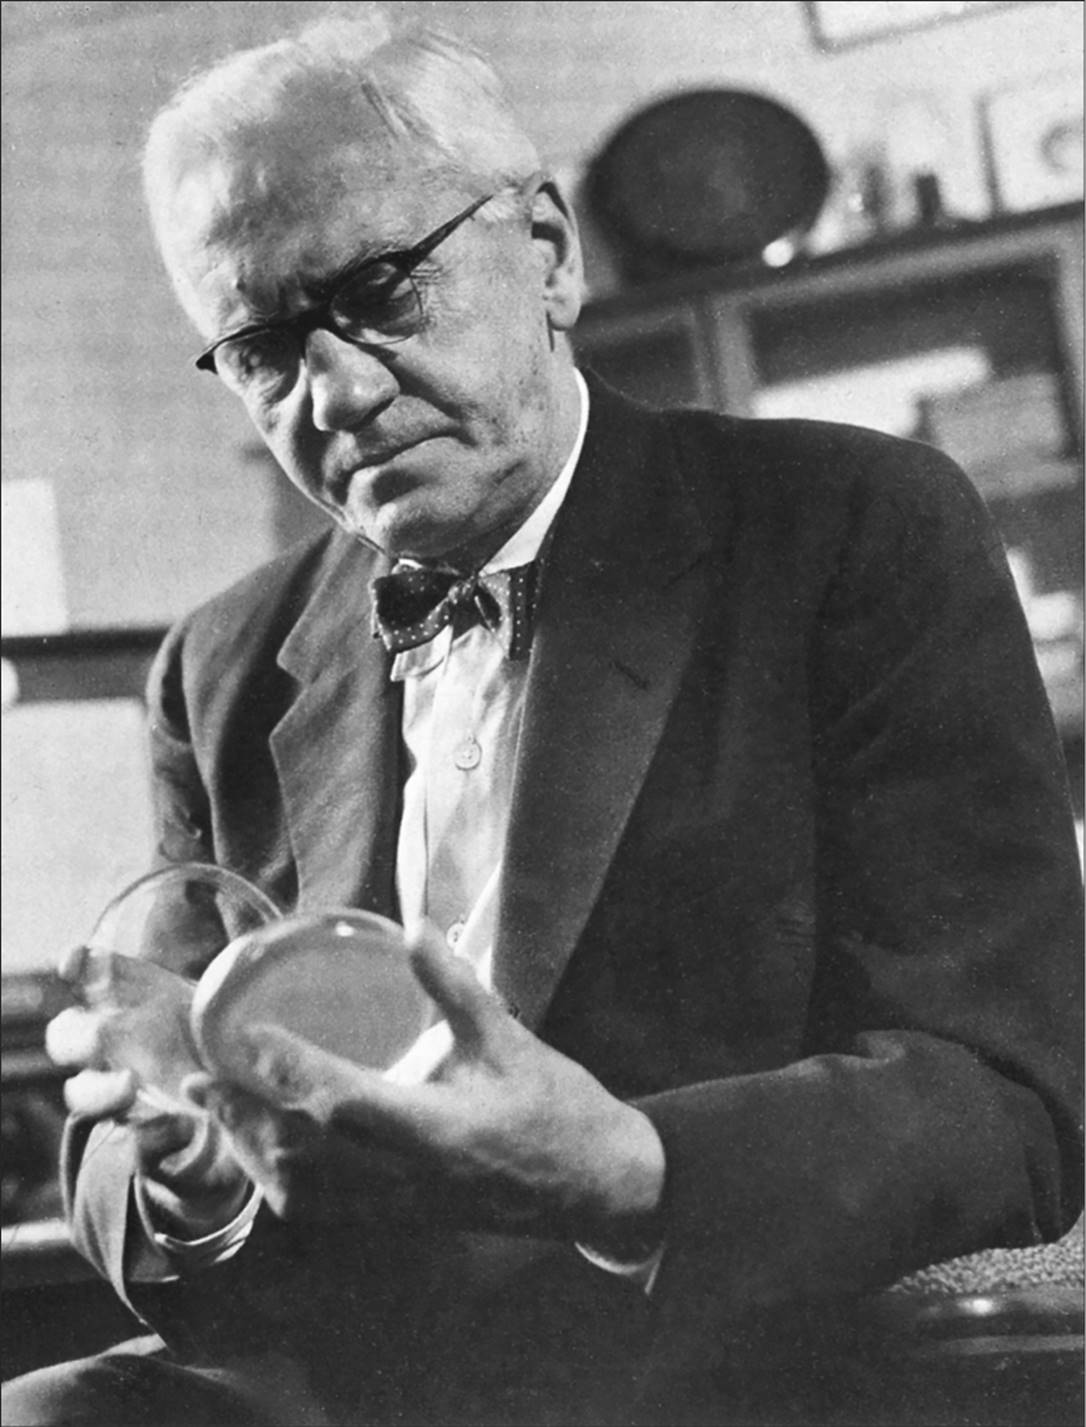  L0000655 Sir Alexander Fleming. Credit: Wellcome Library, London. Wellcome Images images@wellcome.ac.uk http://wellcomeimages.org Sir Alexander Fleming. Published:  -   Copyrighted work available under Creative Commons Attribution only licence CC BY 4.0 http://creativecommons.org/licenses/by/4.0/